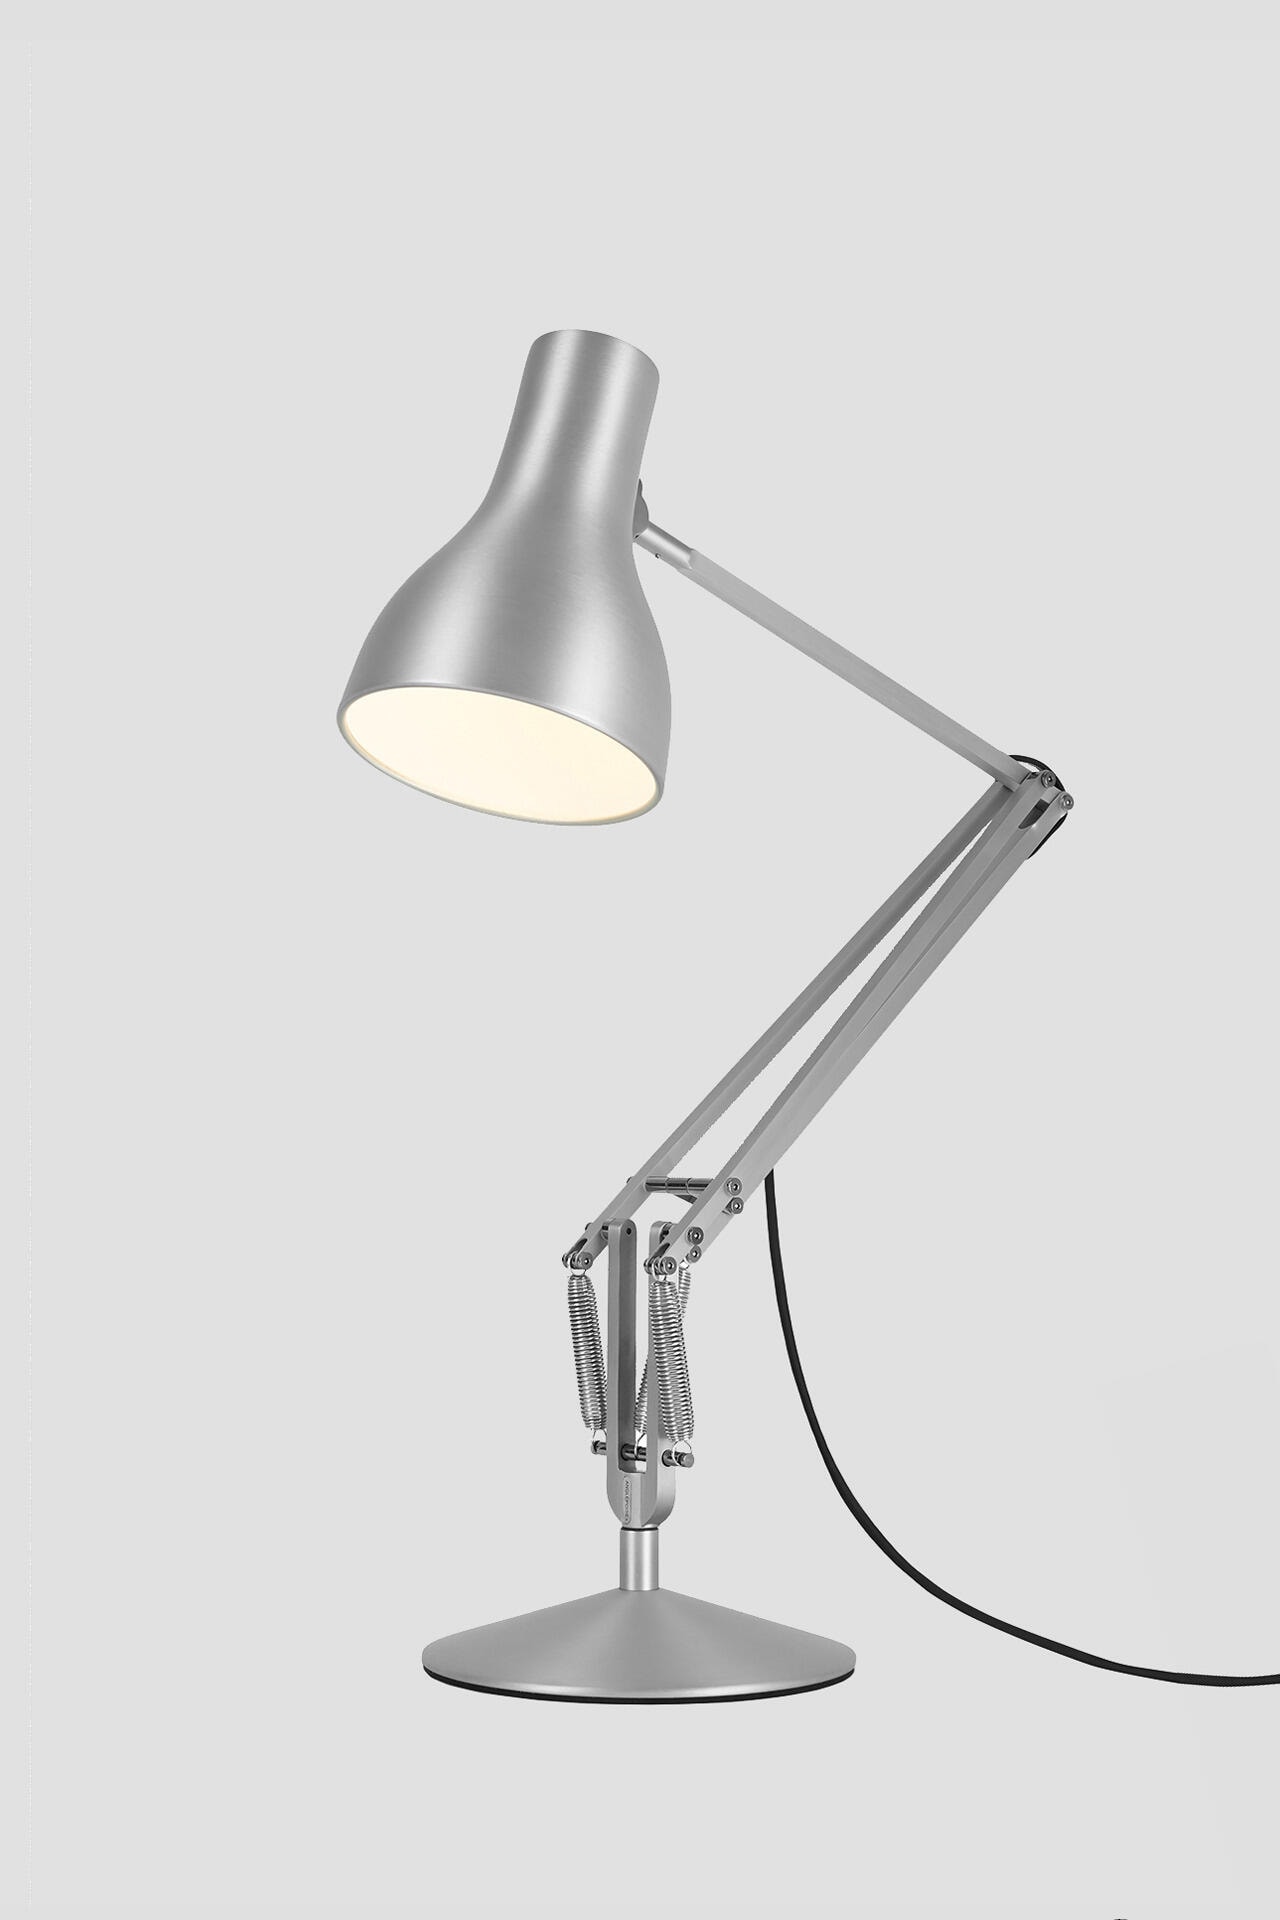 ANGLEPOISE TYPE752